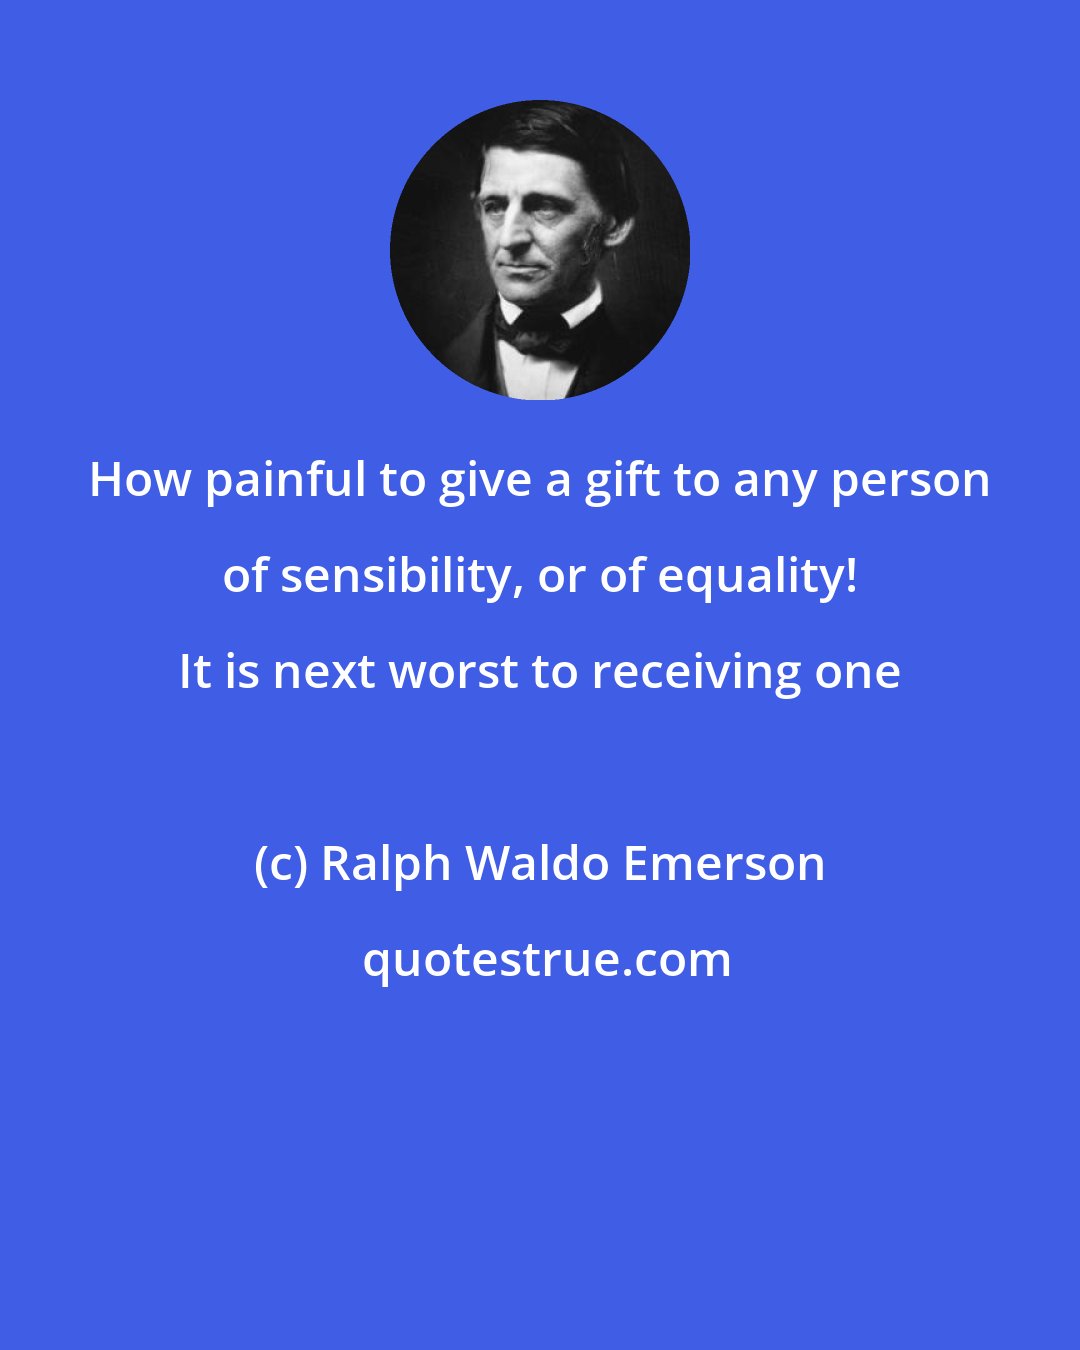 Ralph Waldo Emerson: How painful to give a gift to any person of sensibility, or of equality! It is next worst to receiving one